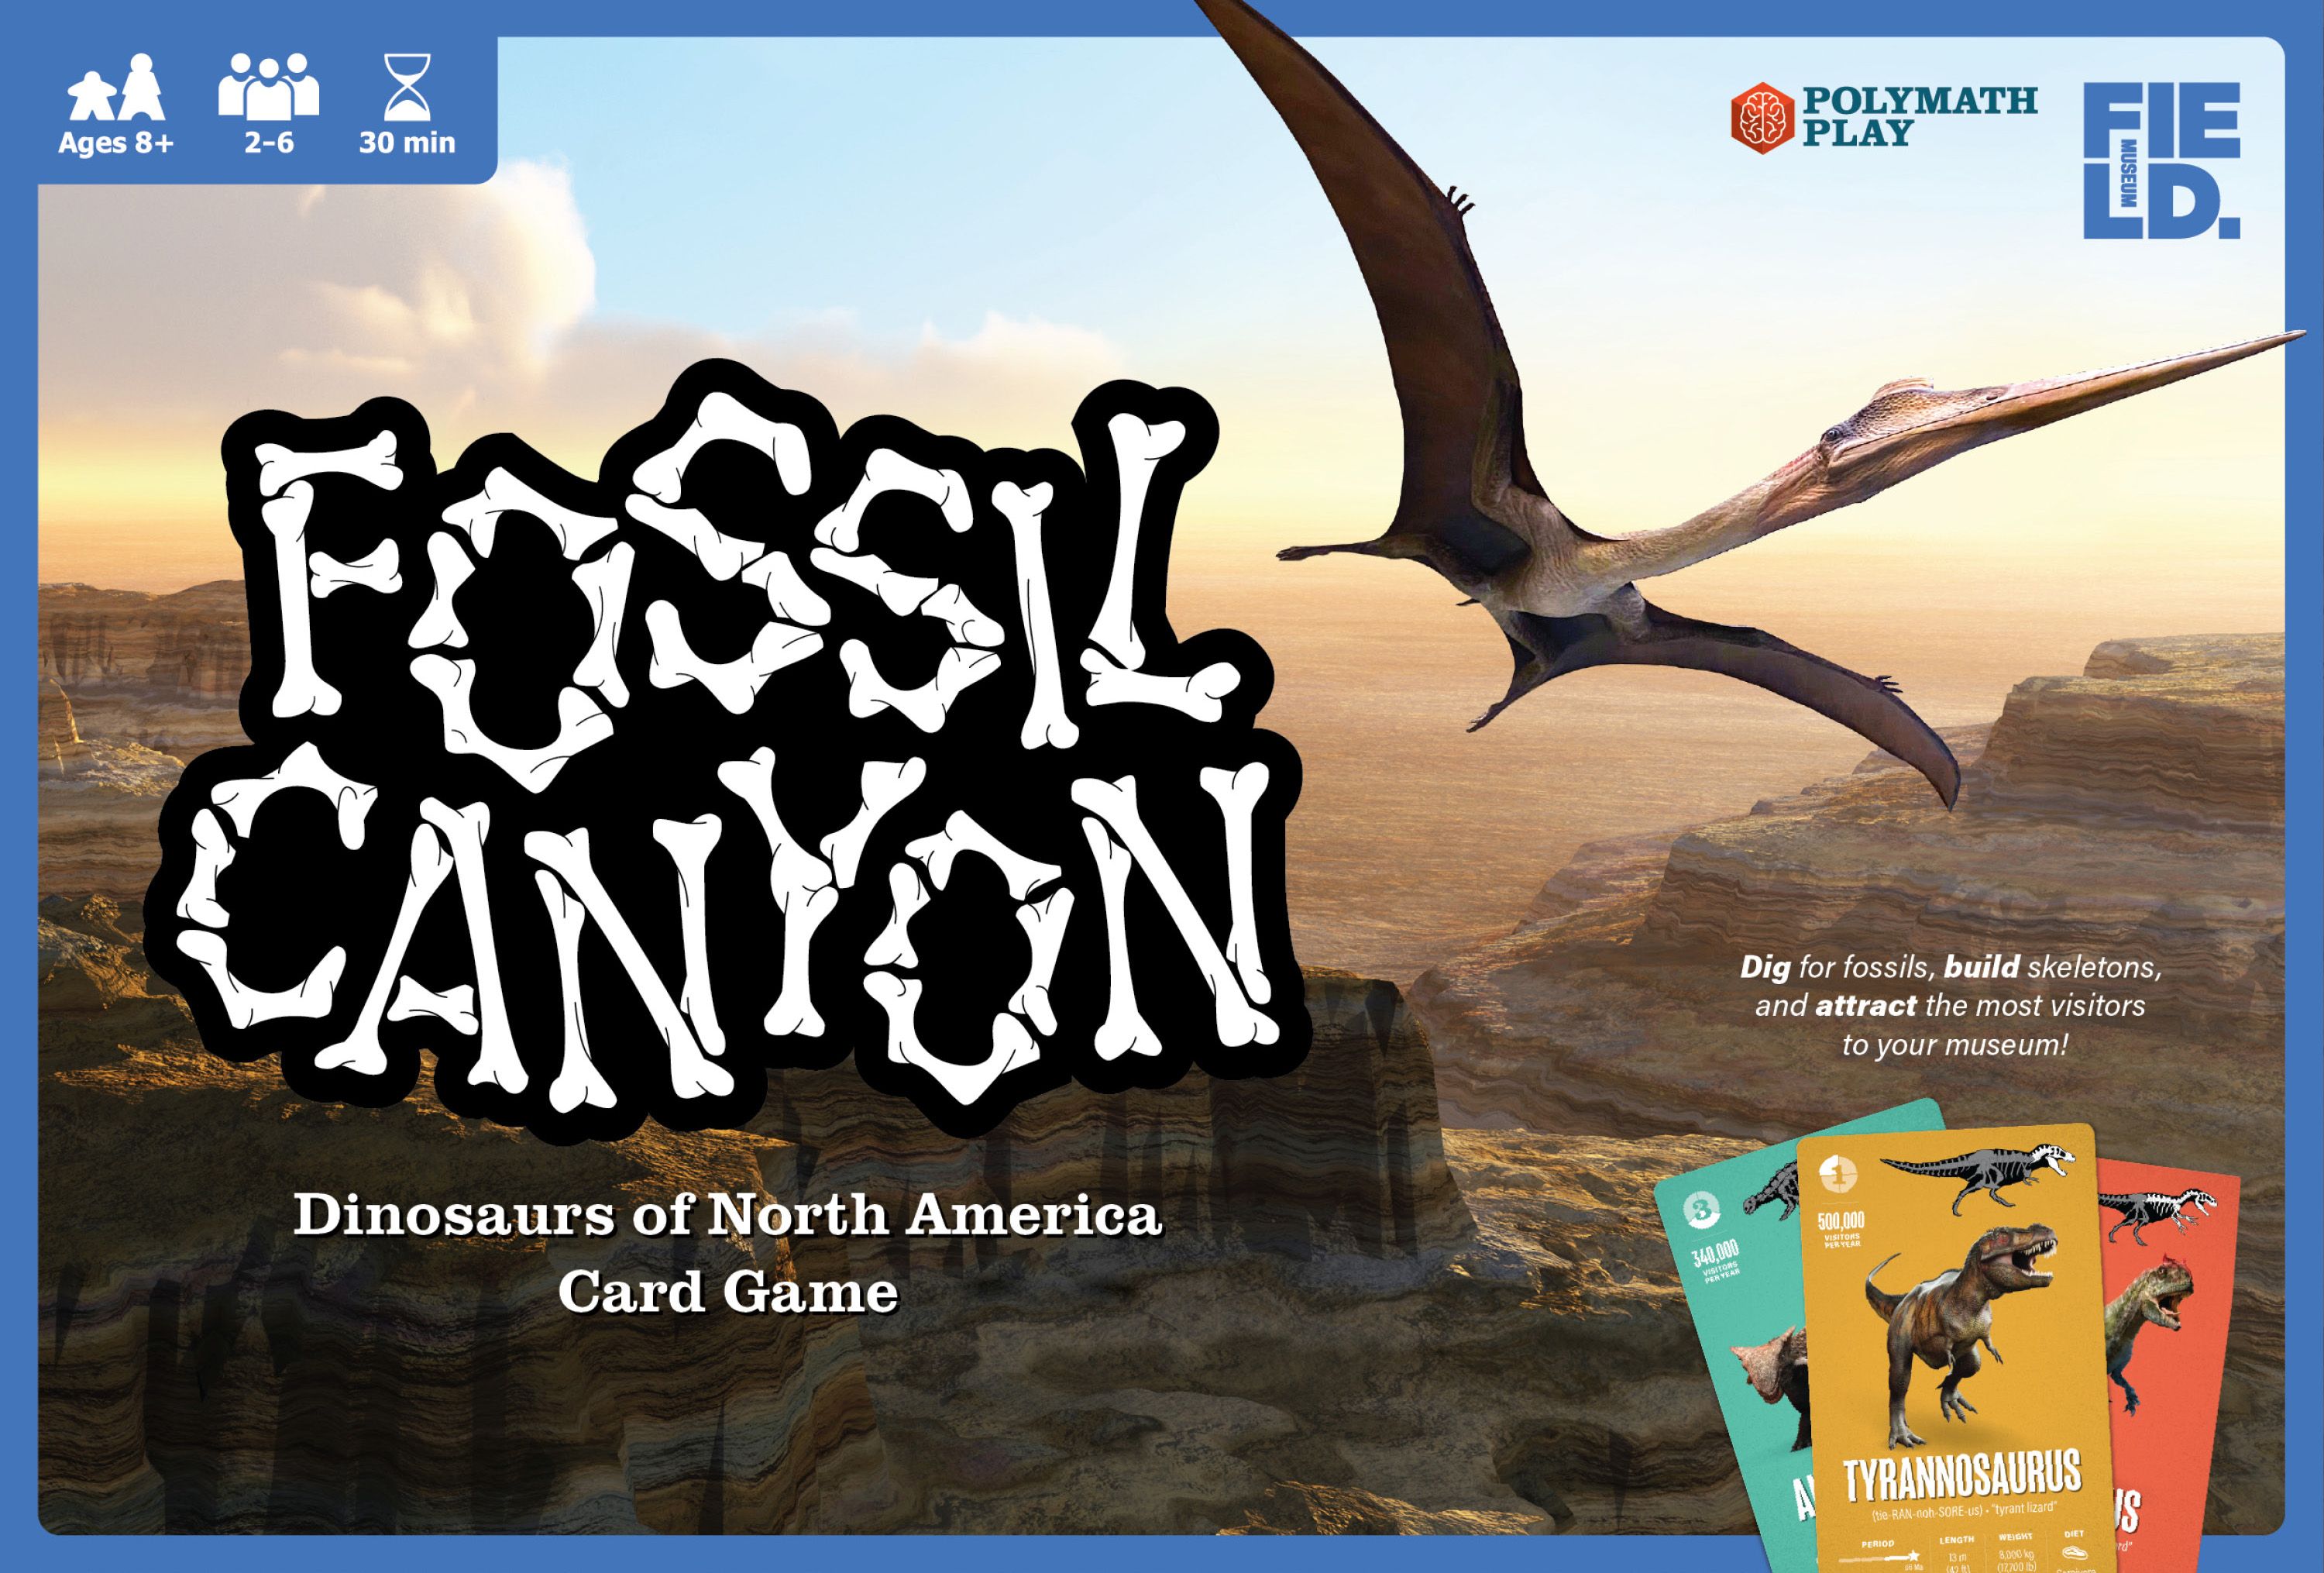 Fossil Canyon Deluxe Edition